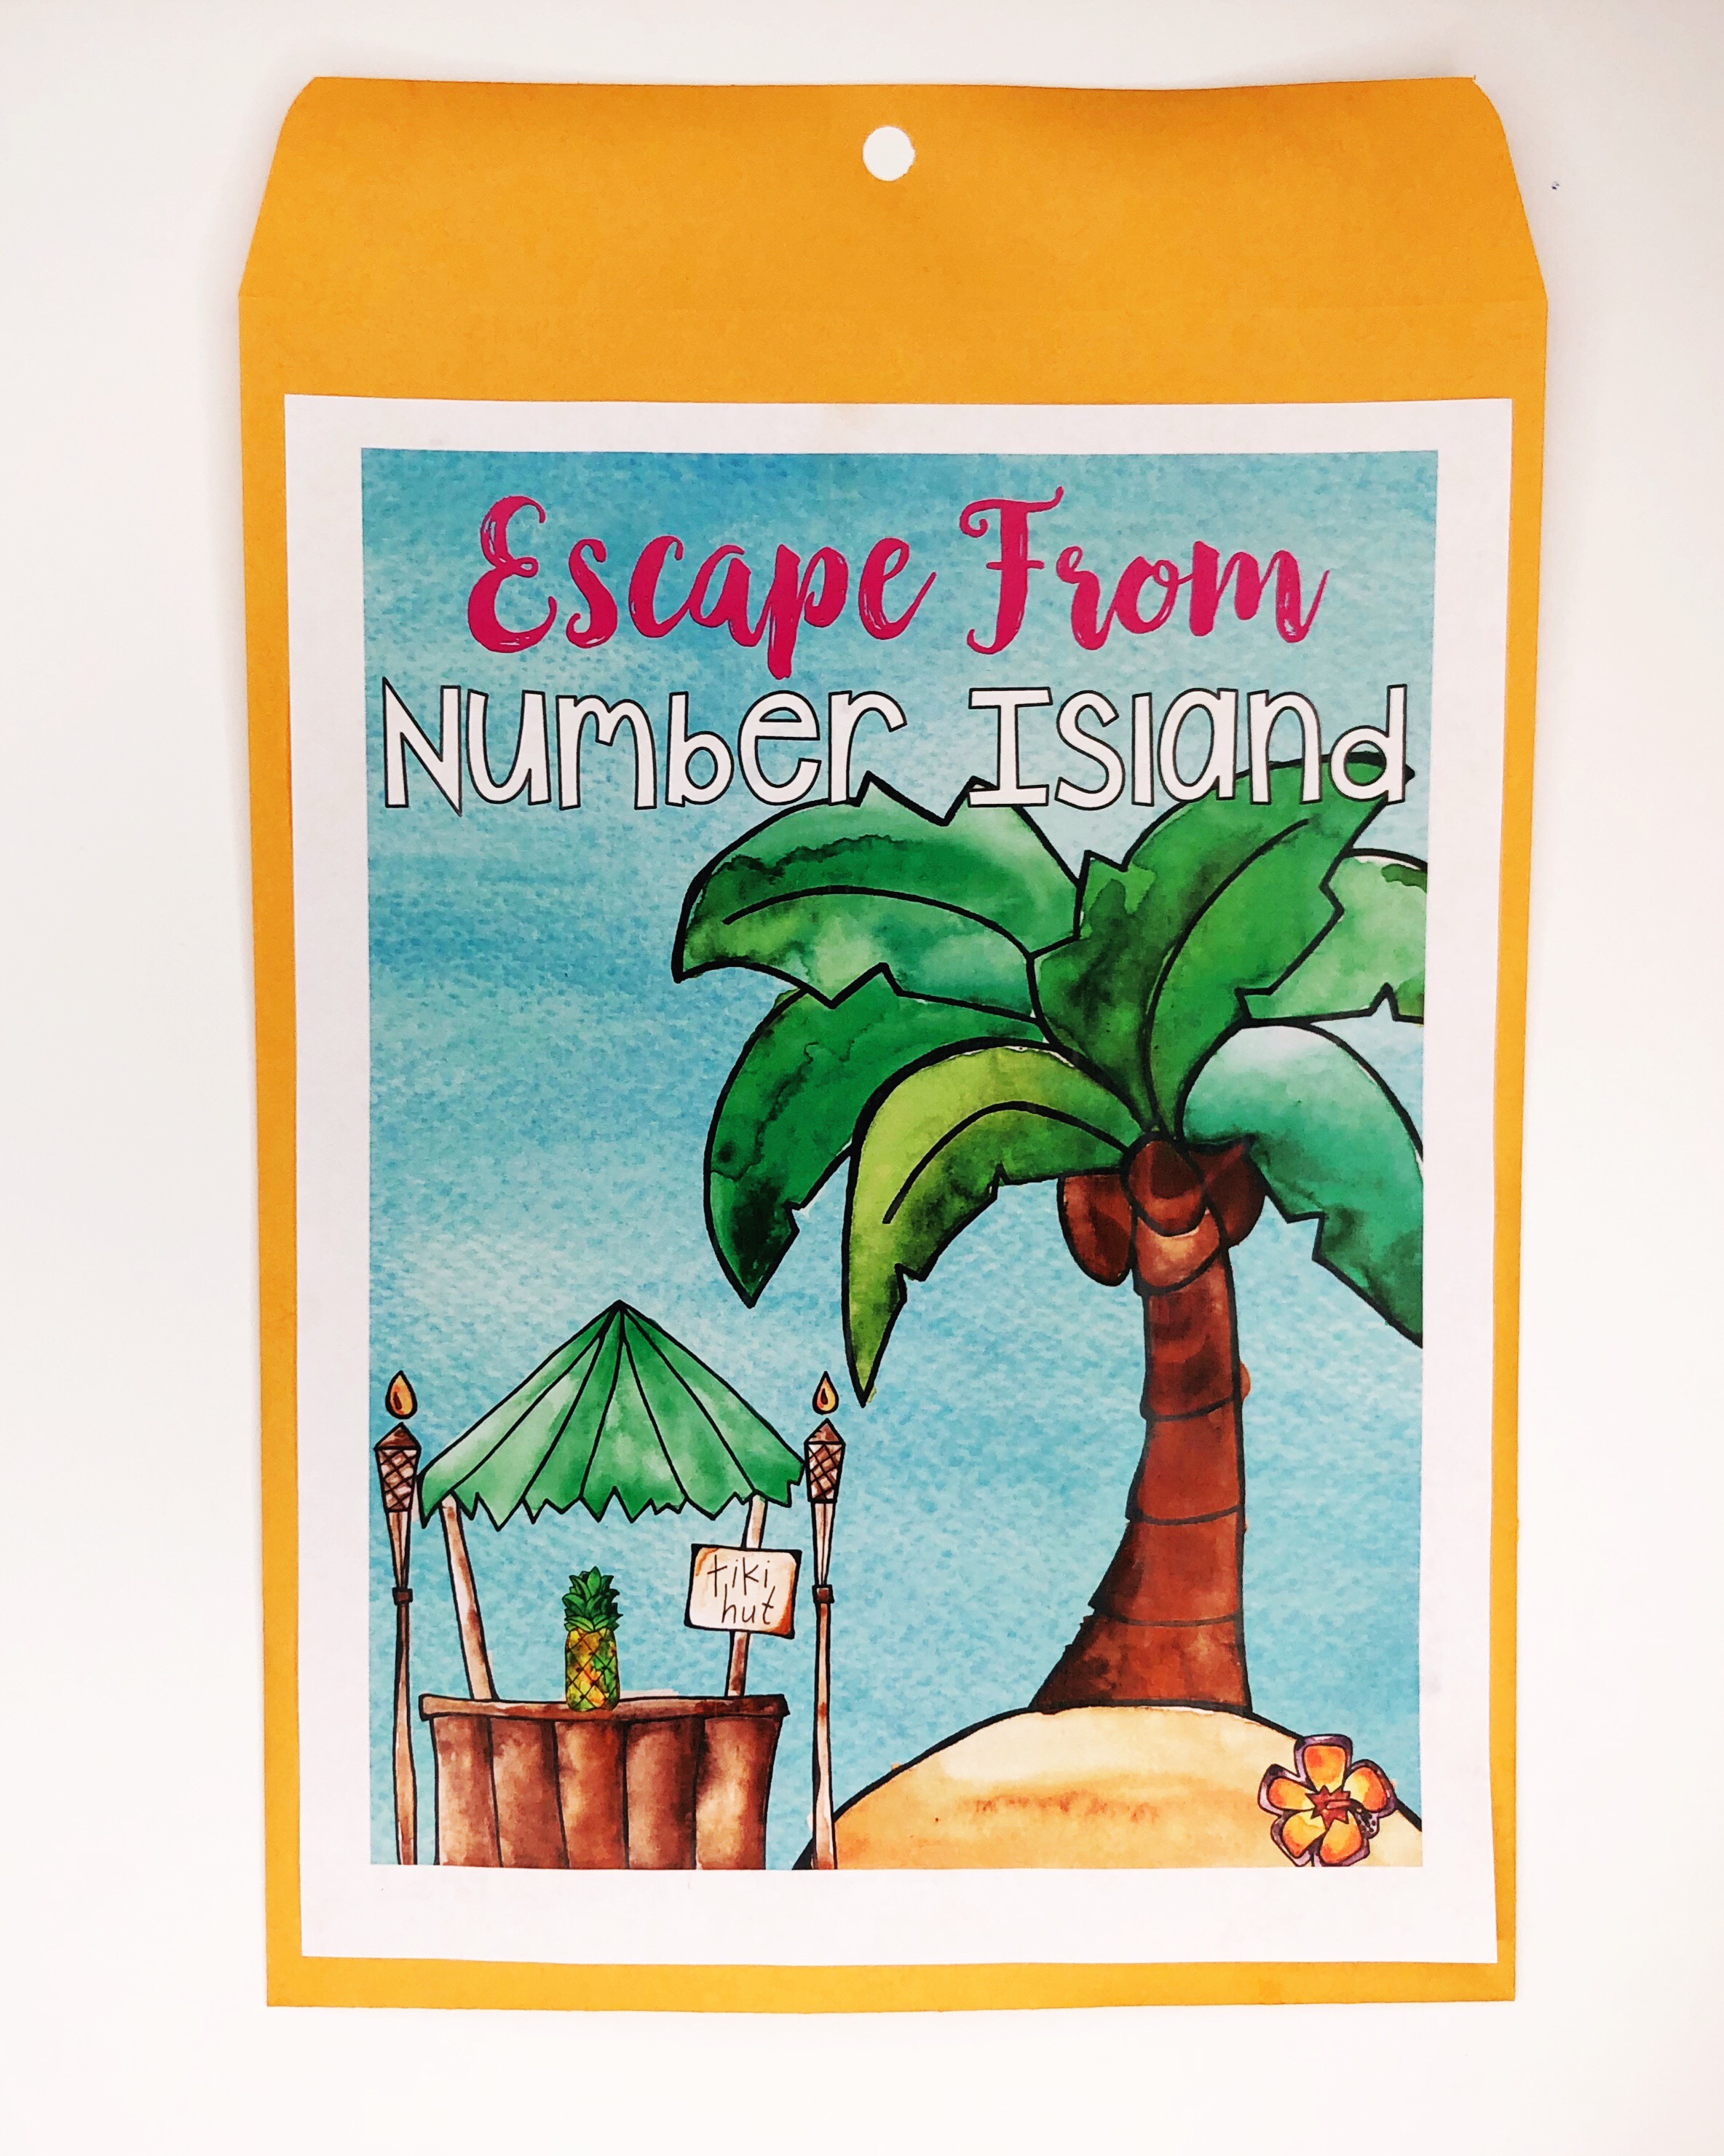 Escape classrooms envelope titled Escape From Number Island with palm tree and tiki hut illustration